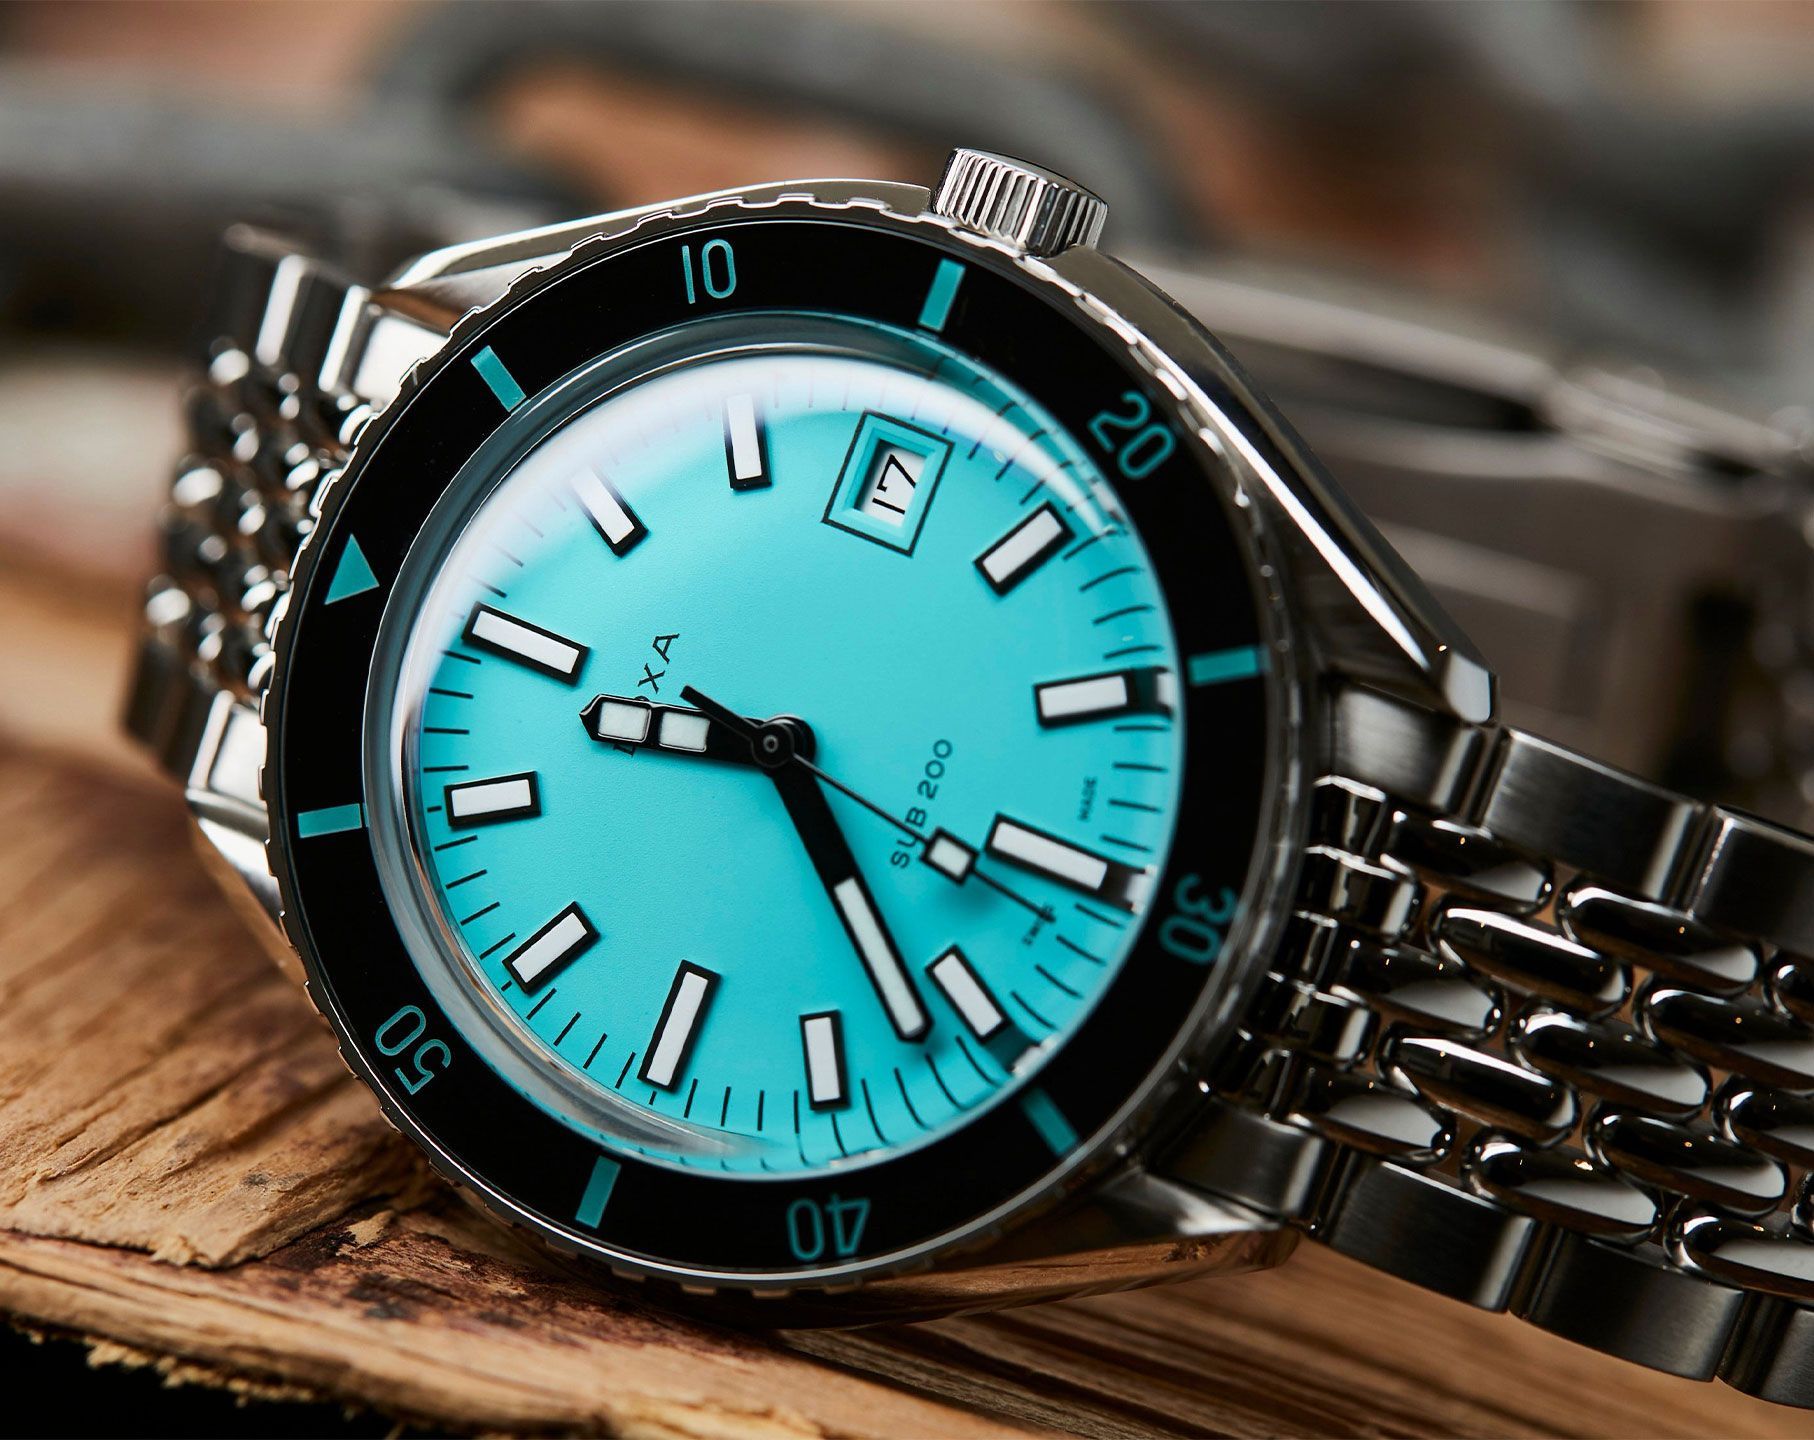 Doxa Aquamarine 42 mm Watch in Turquoise Dial For Men - 5